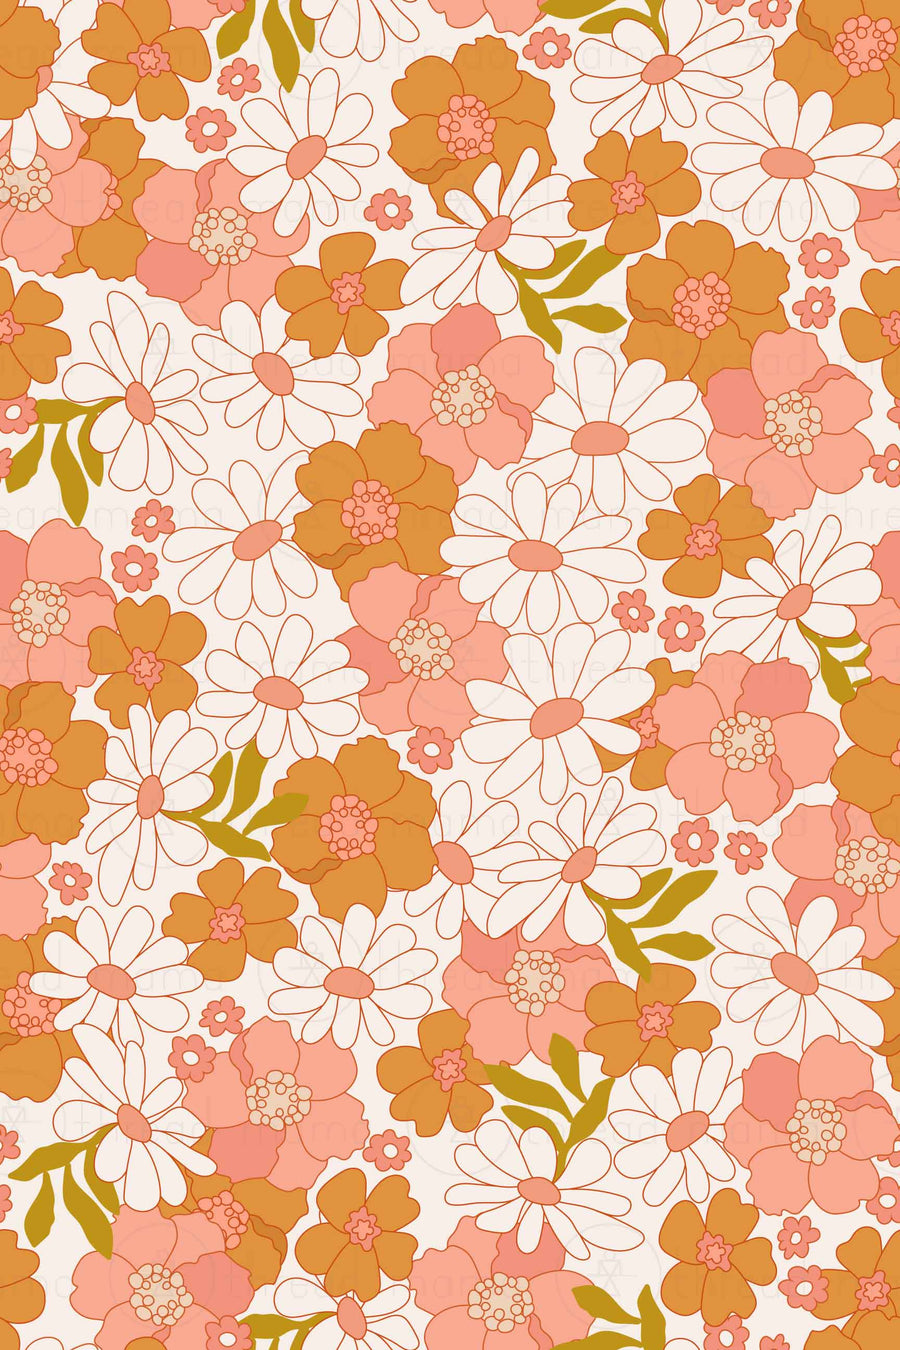 Repeating Pattern #30 (Seamless)